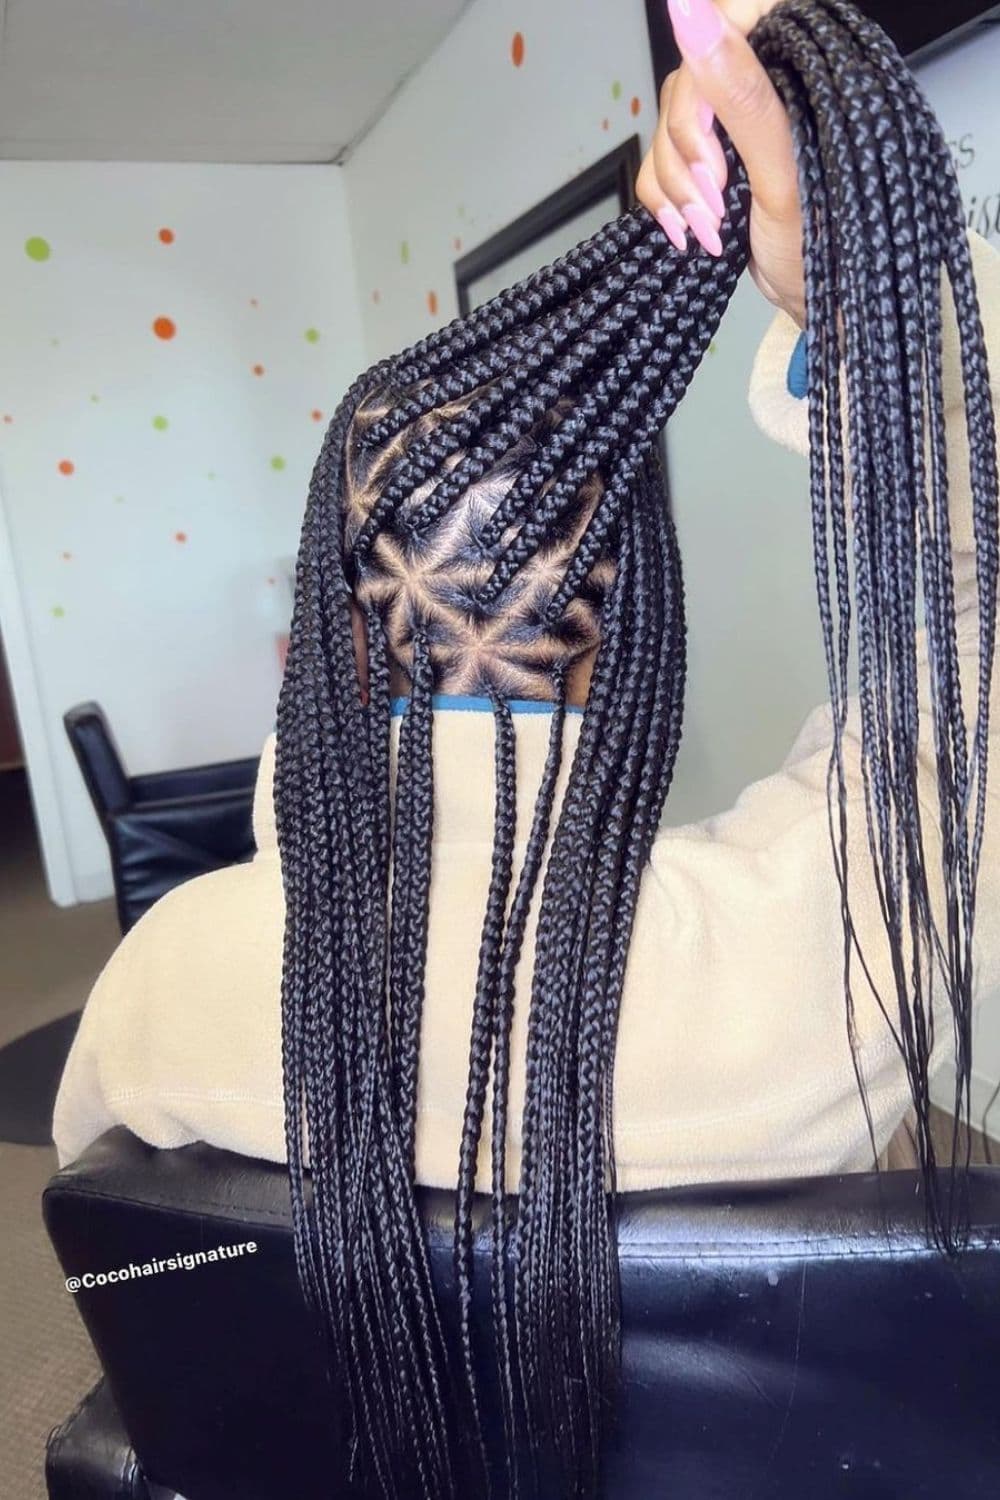 A woman with triangle part knotless braids is holding her hair up.